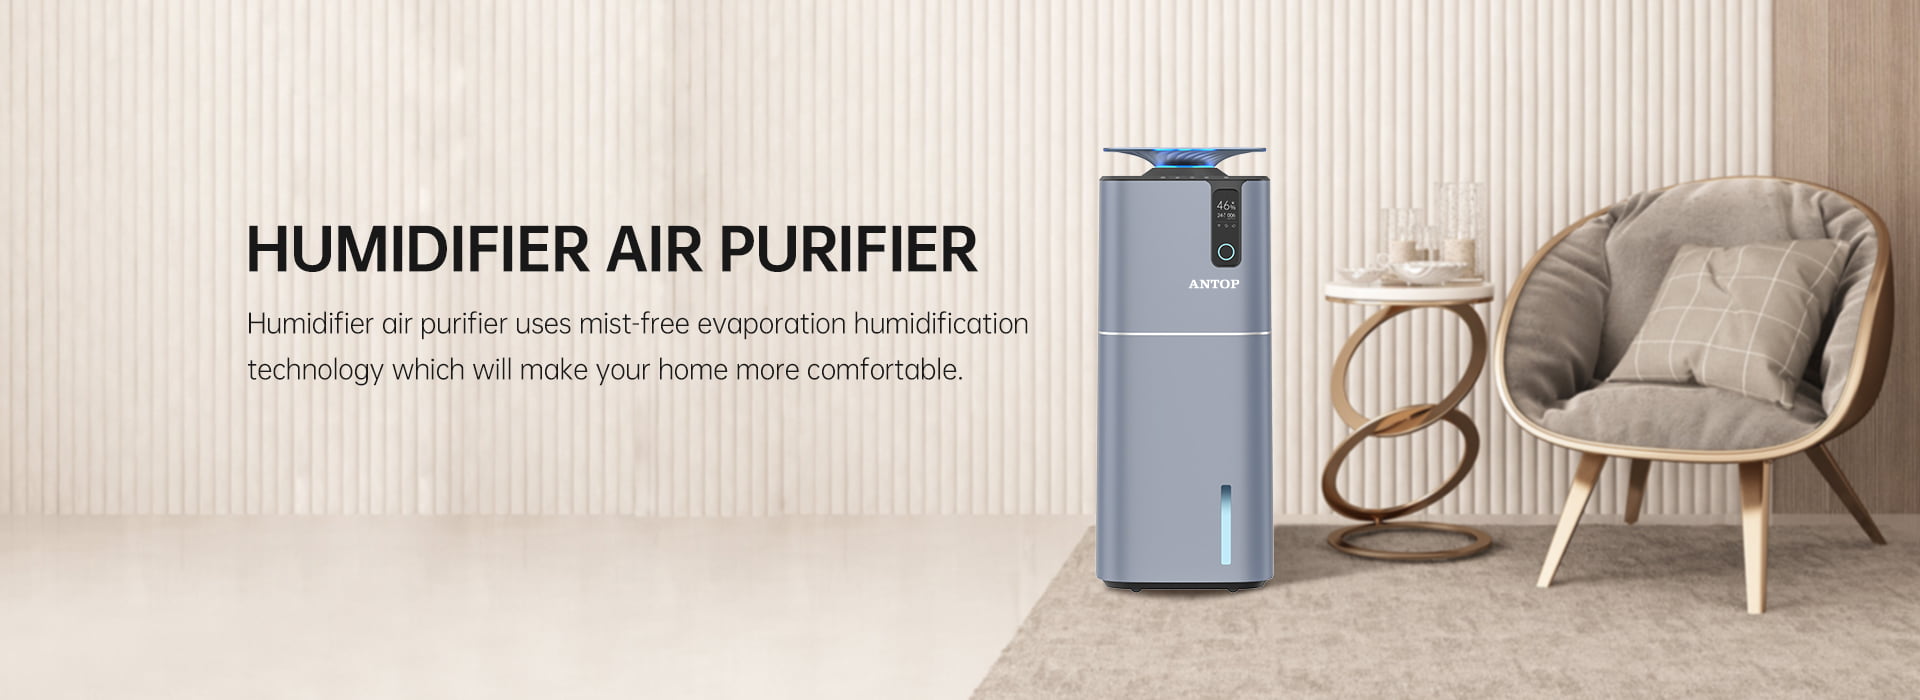 Humidifier Air Purifier Category